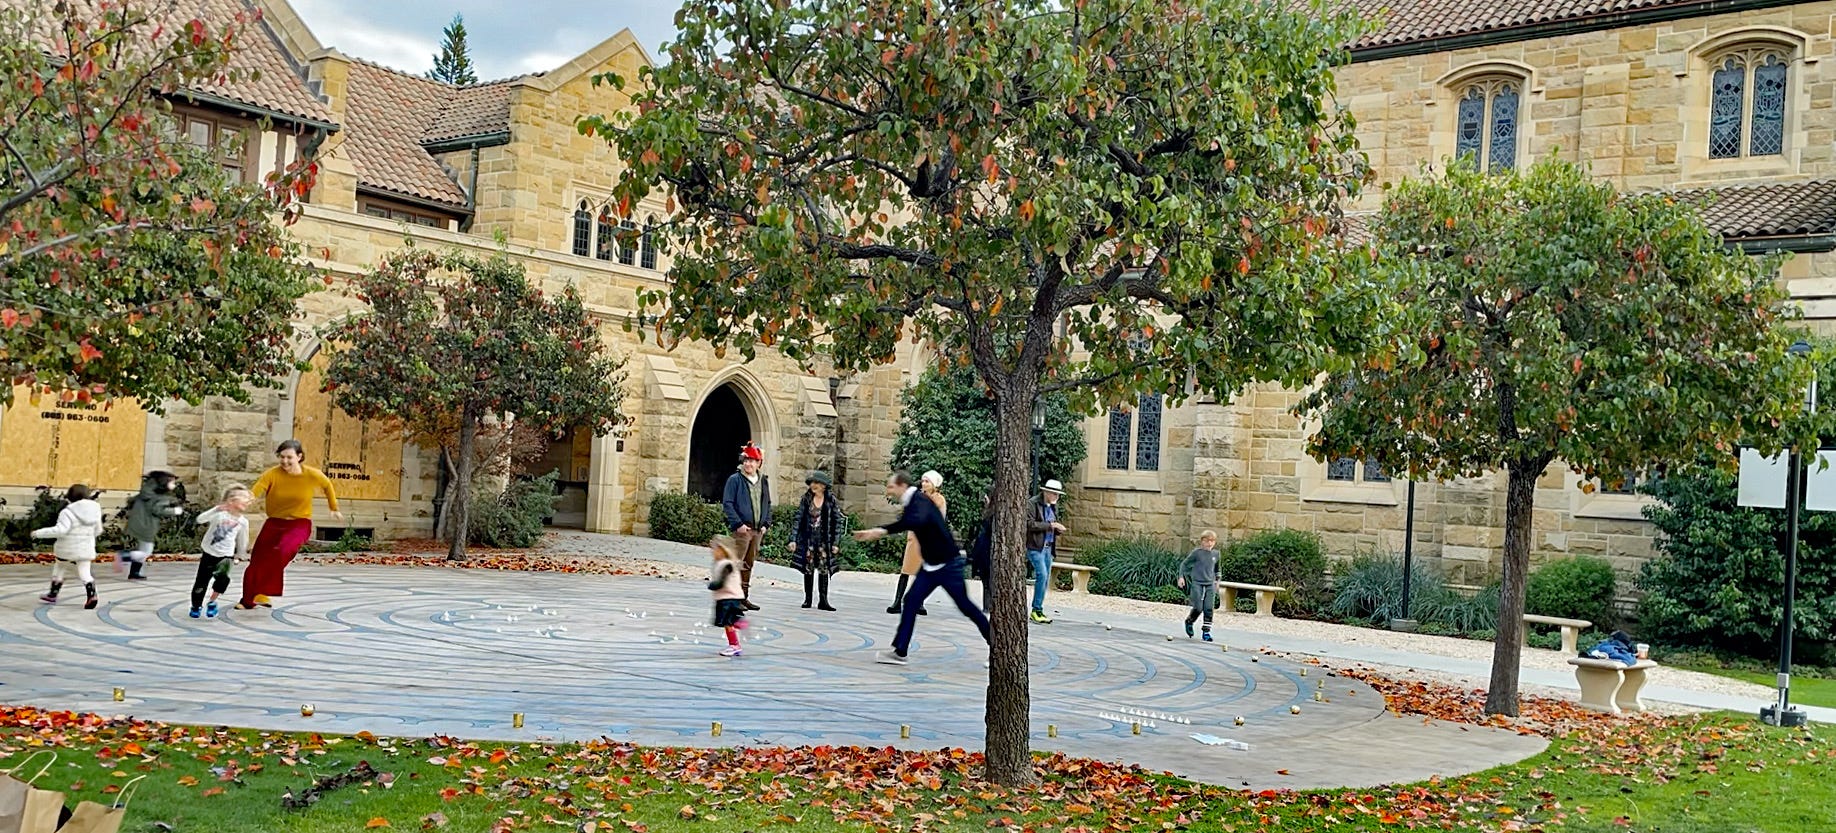 Members of a large family walk around on a stone labyrinth in a church courtyard. Children are running and adults chasing them. 